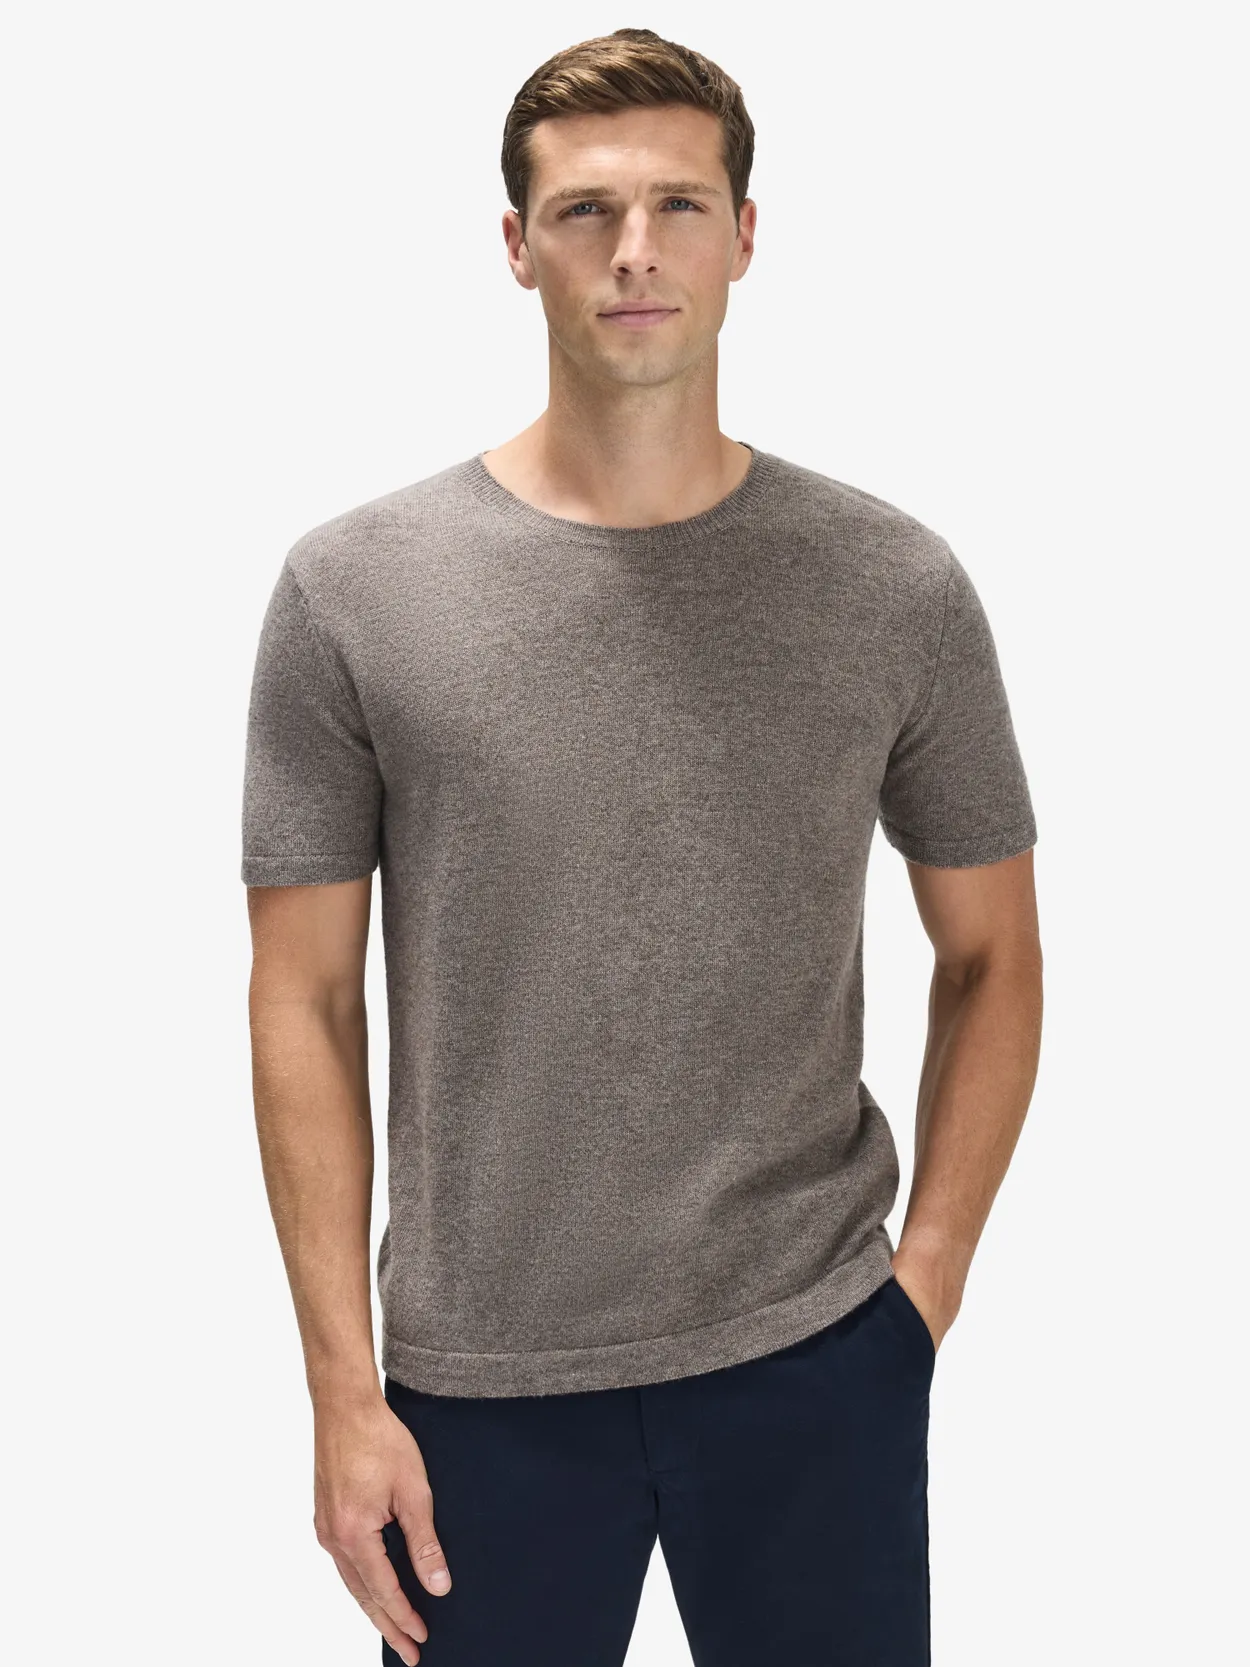 Brown Cashmere & Wool T-shirt